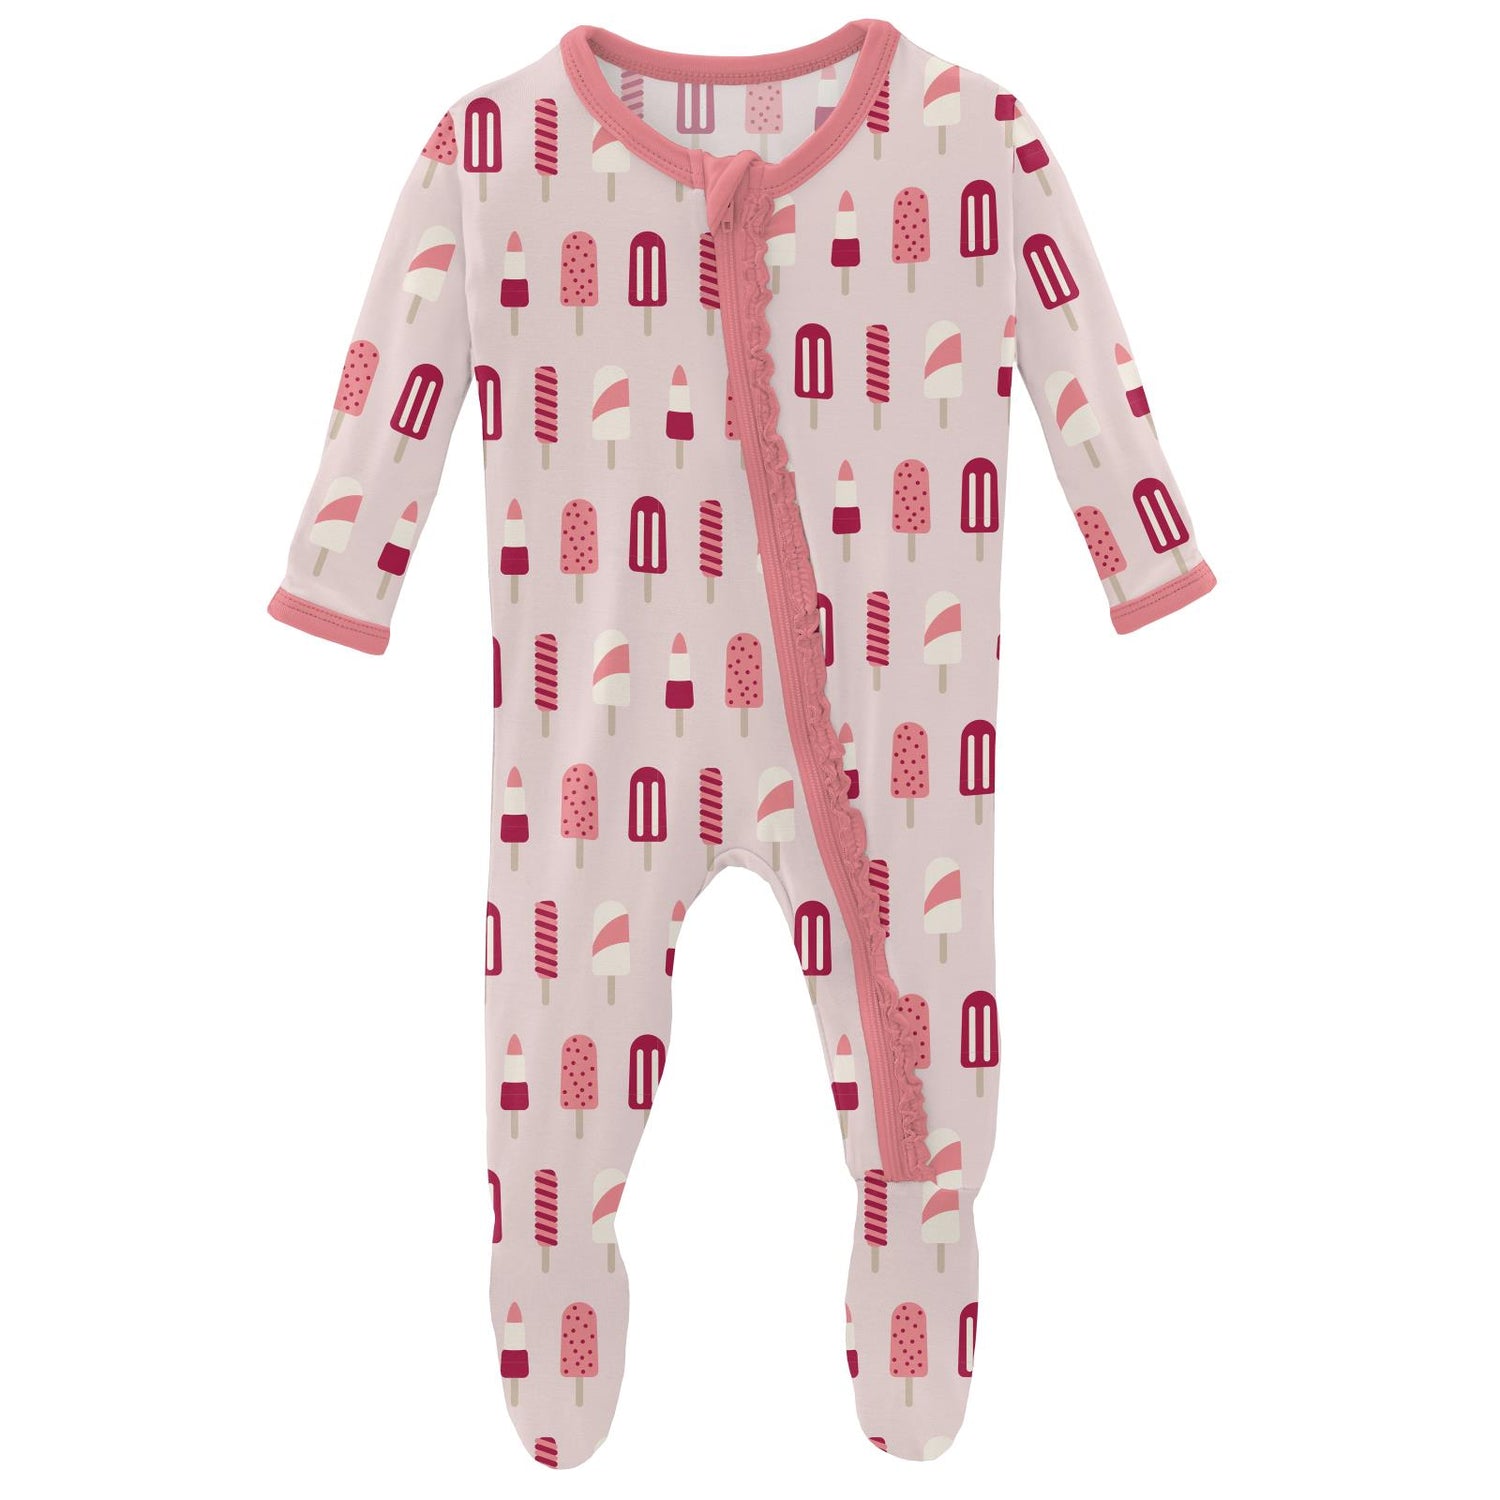 Print Muffin Ruffle Footie with Zipper in Macaroon Popsicles